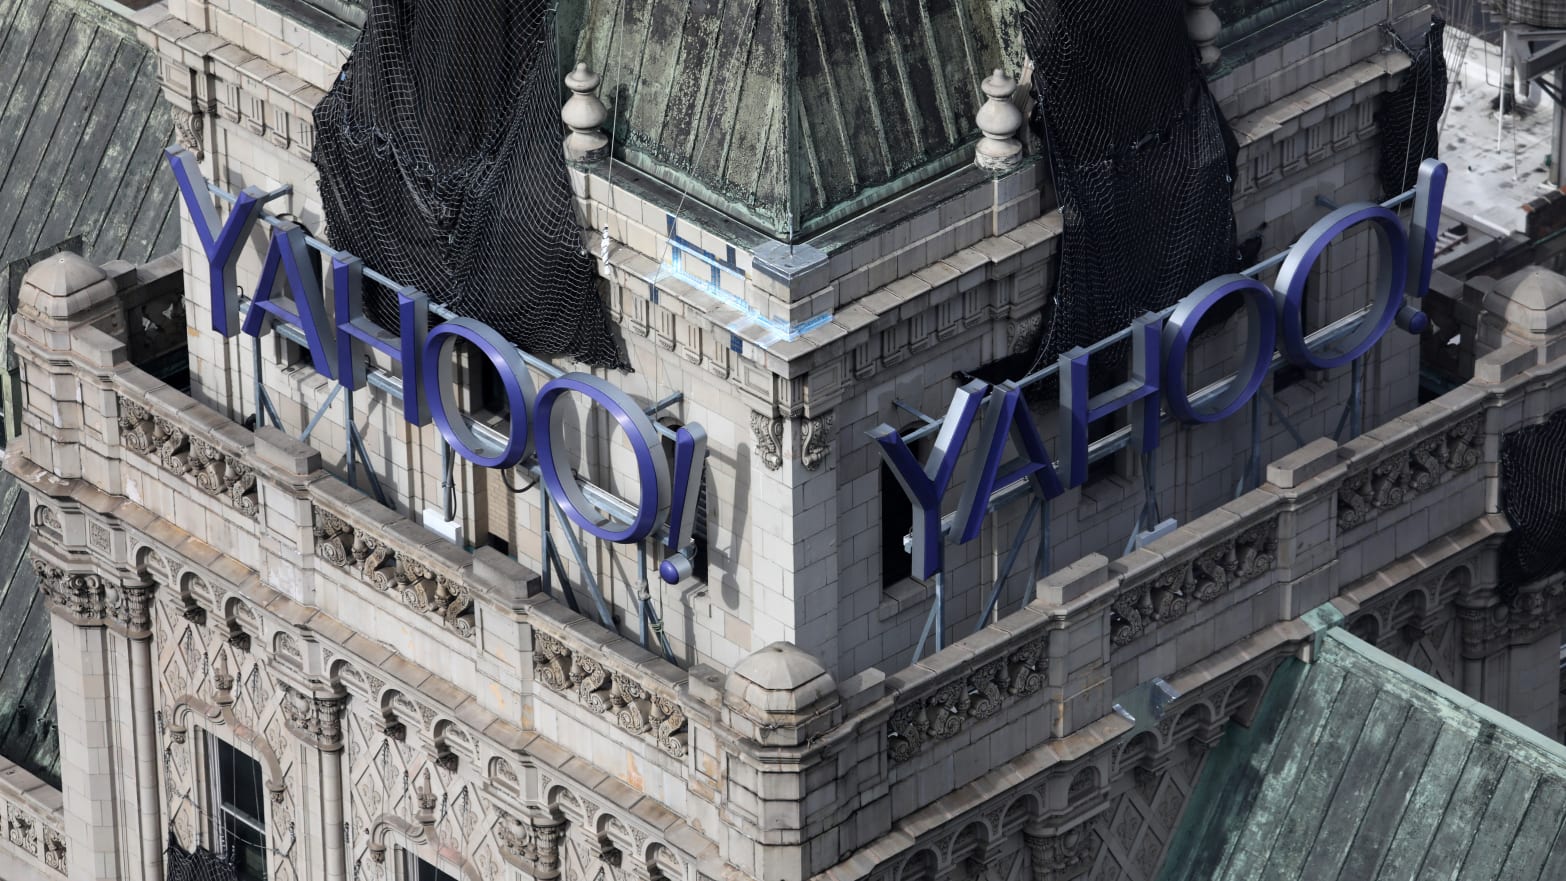 The Yahoo! company logo appears on the old New York Times building,